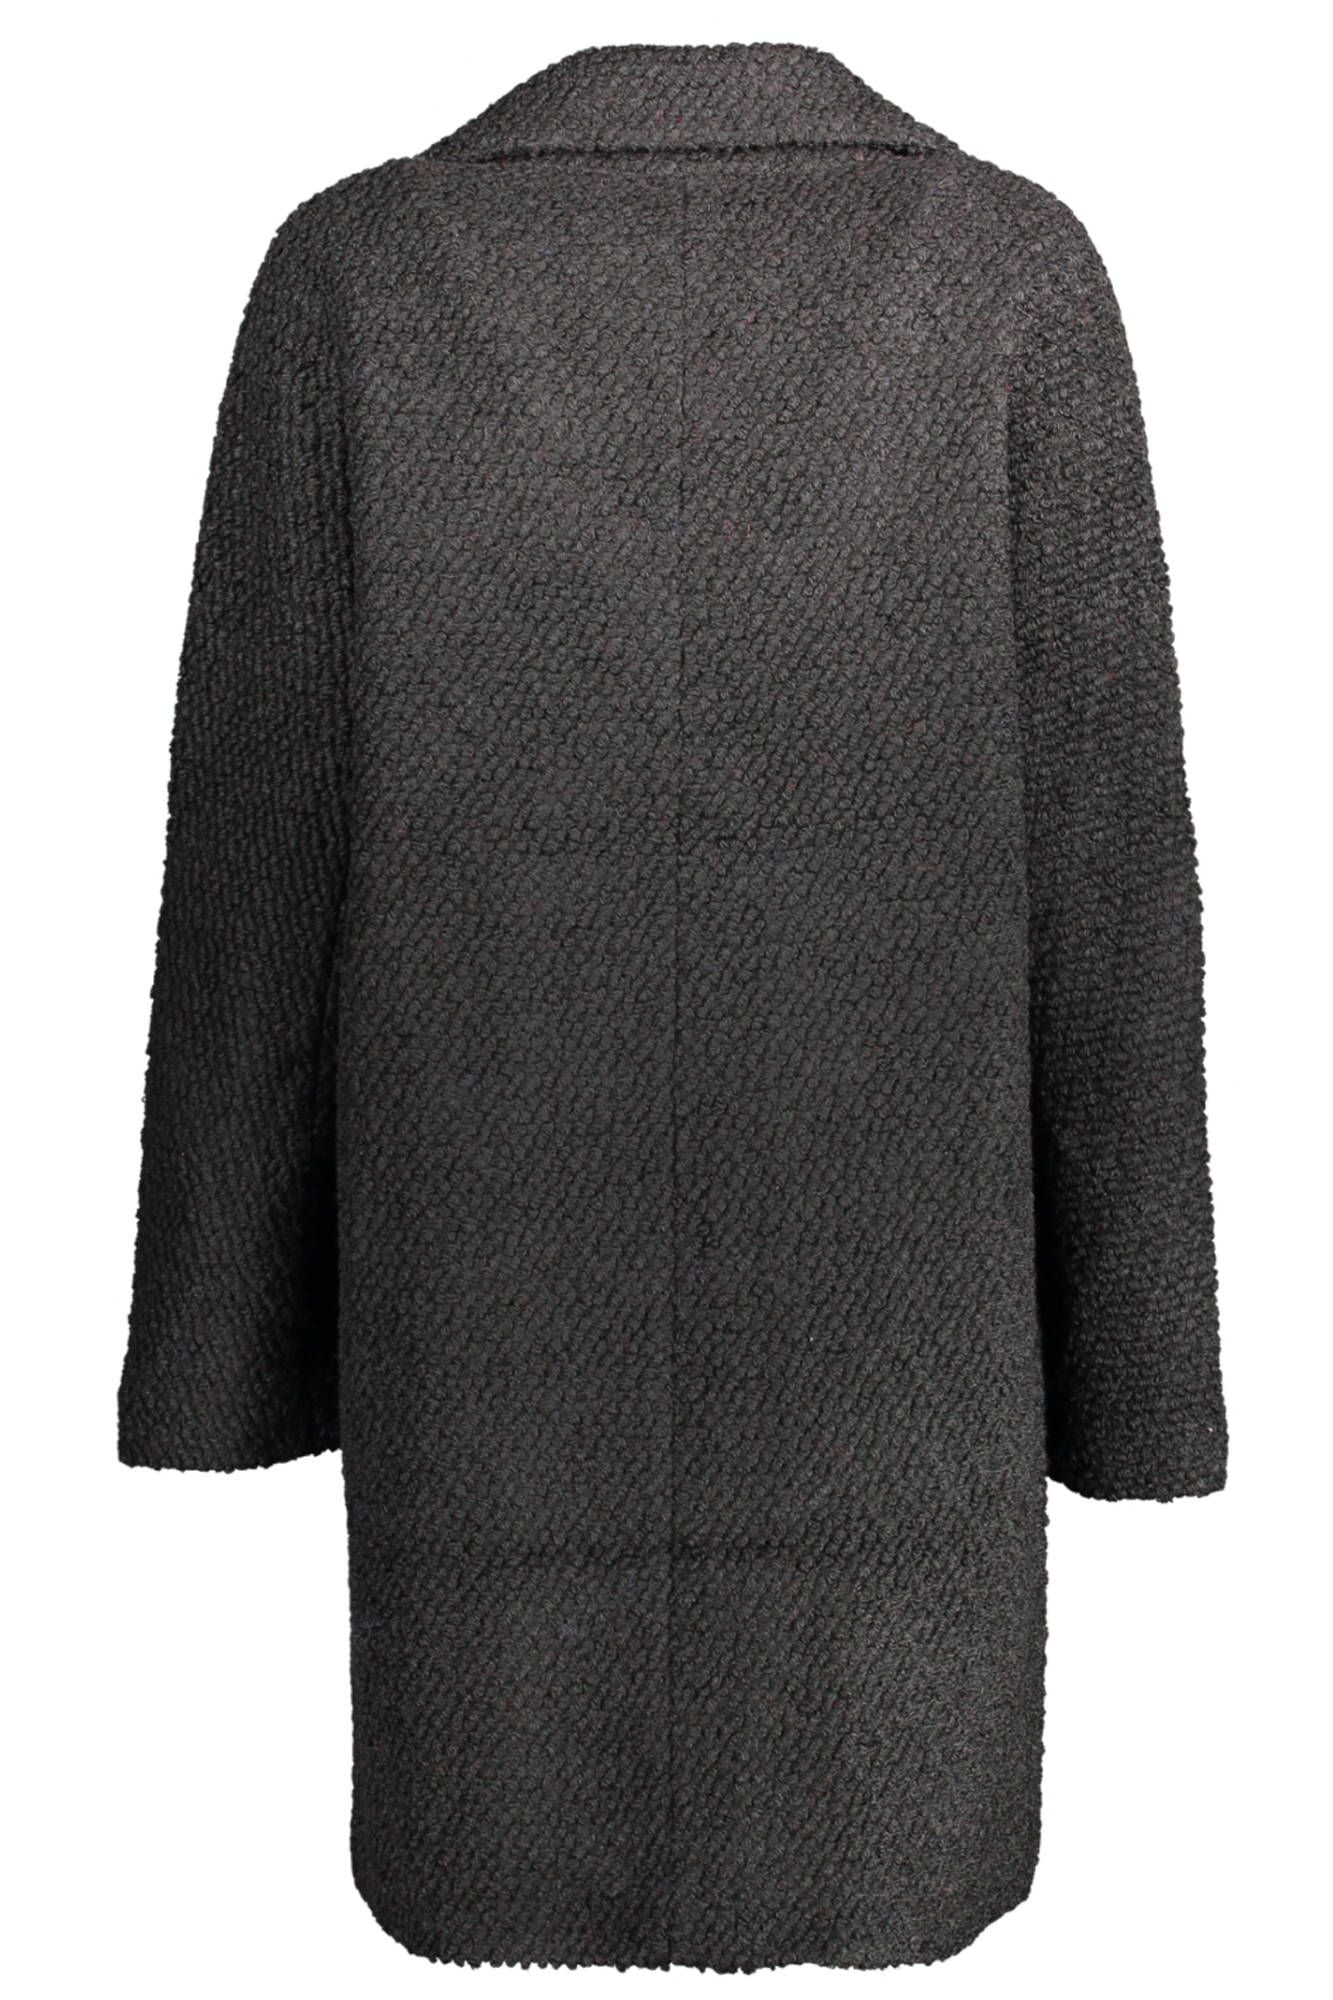 Chic Wool-Blend Black Coat with Signature Accents